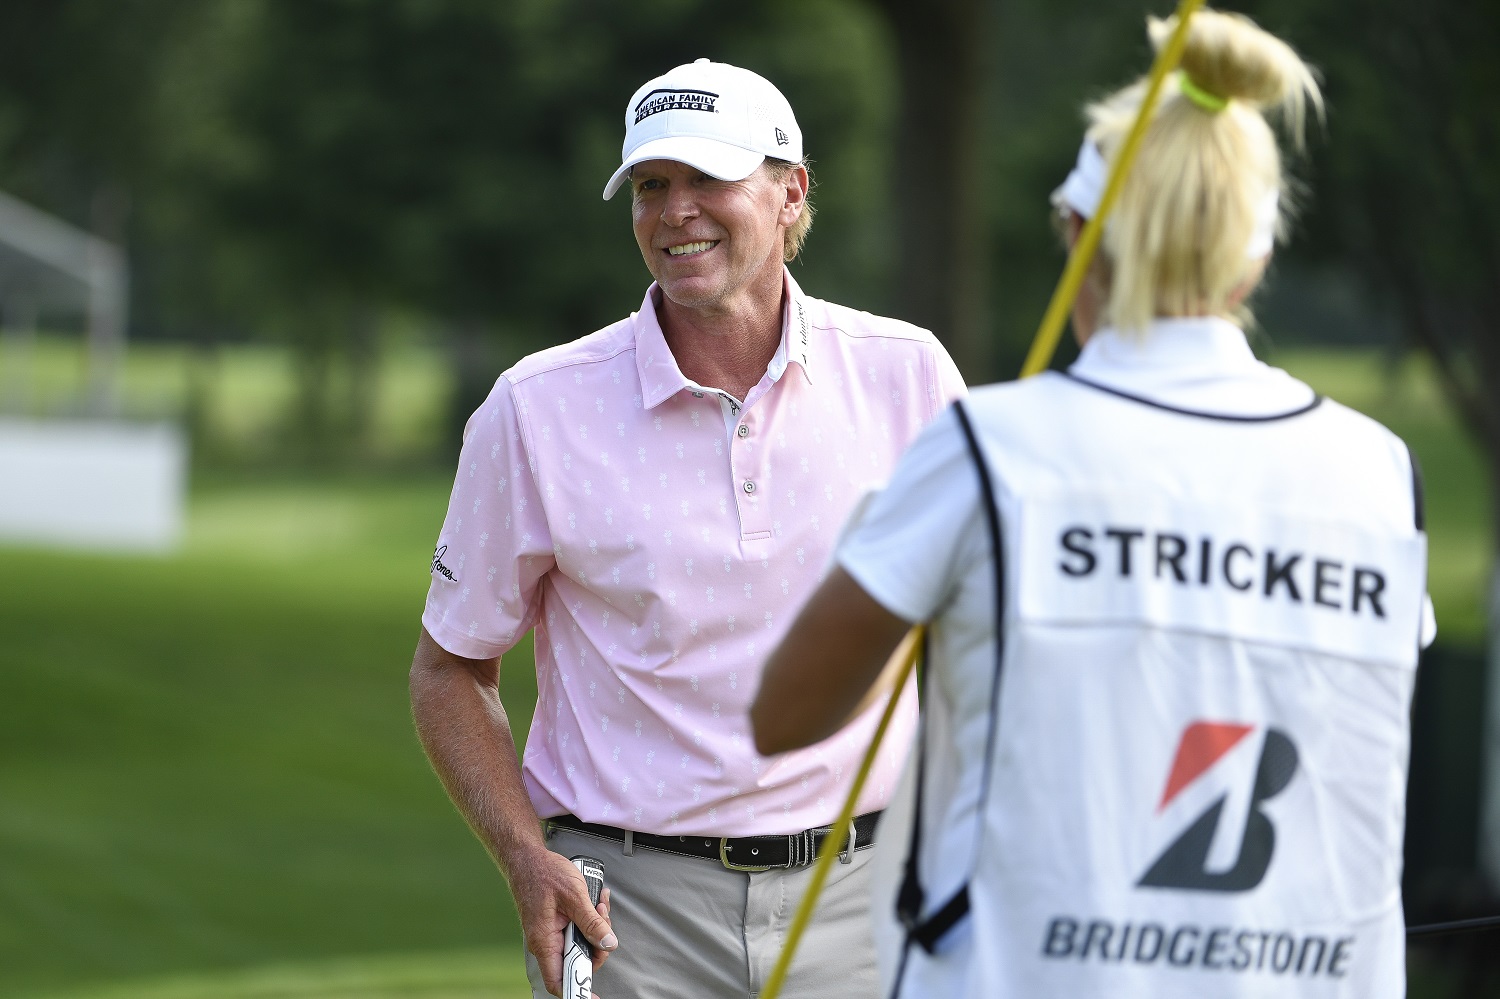 Steve Stricker smiles during the final round of the PGA Tour Champions Bridgestone Senior Players Championship at Firestone Country Club on June 27, 2021, in Akron, Ohio.